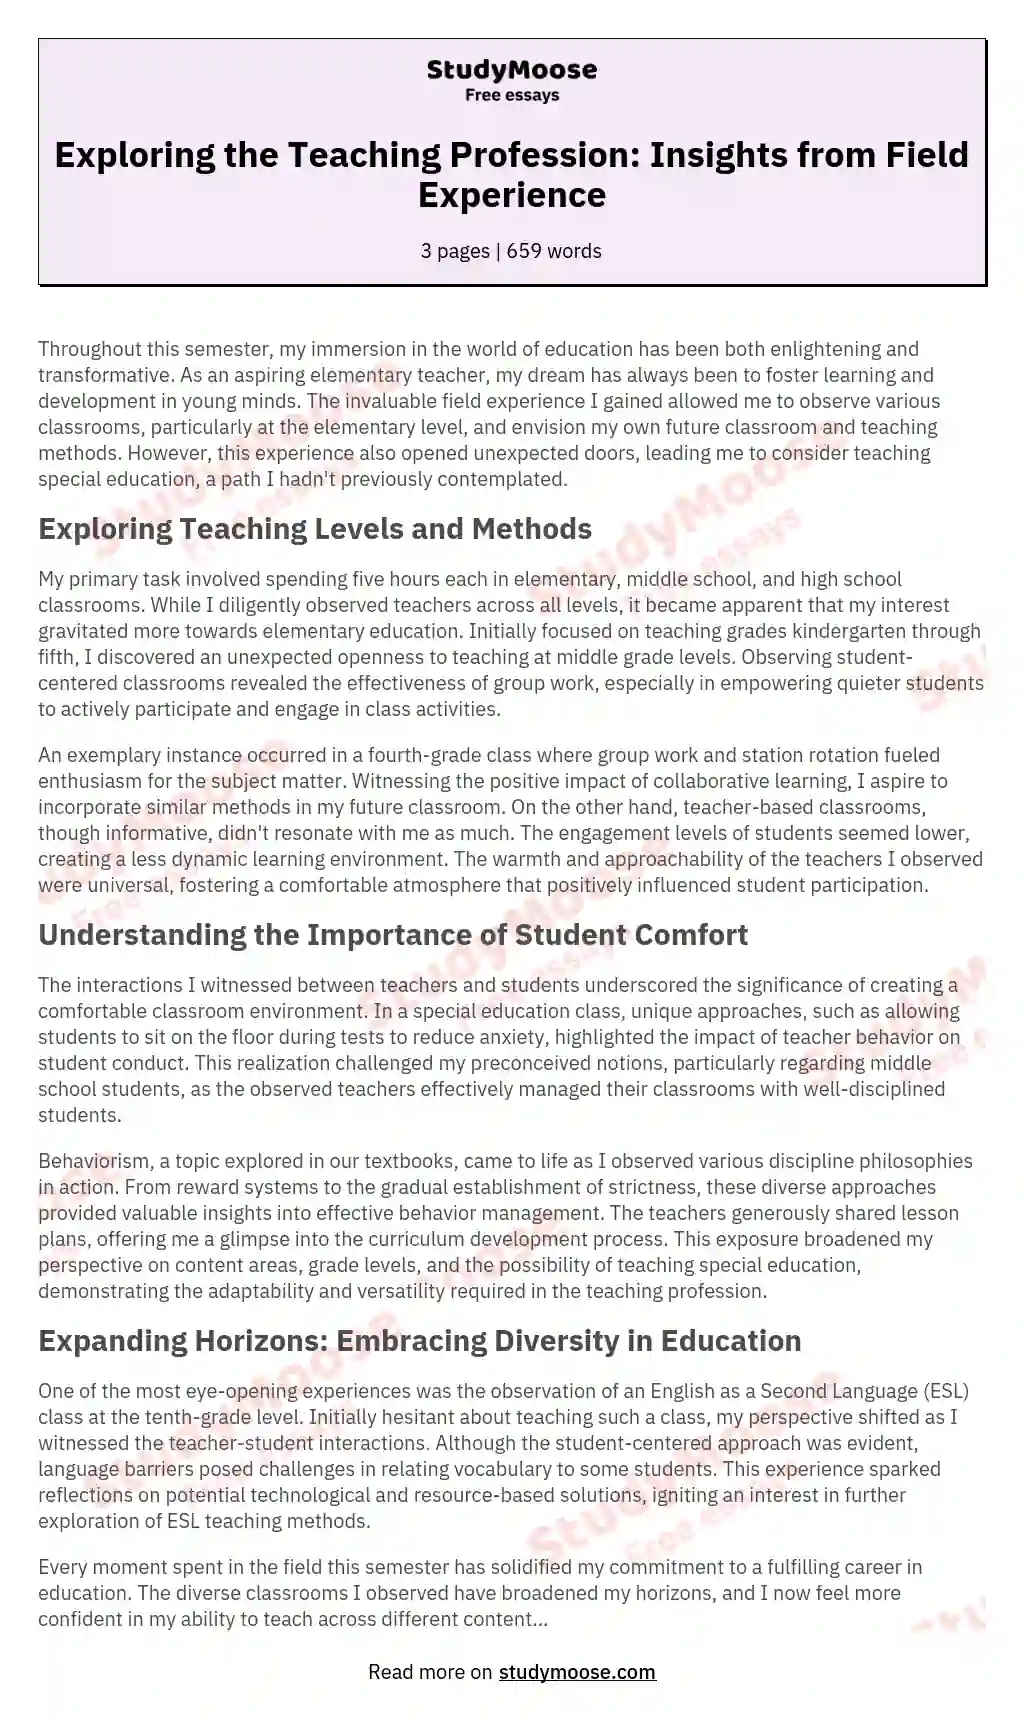 Exploring the Teaching Profession: Insights from Field Experience essay